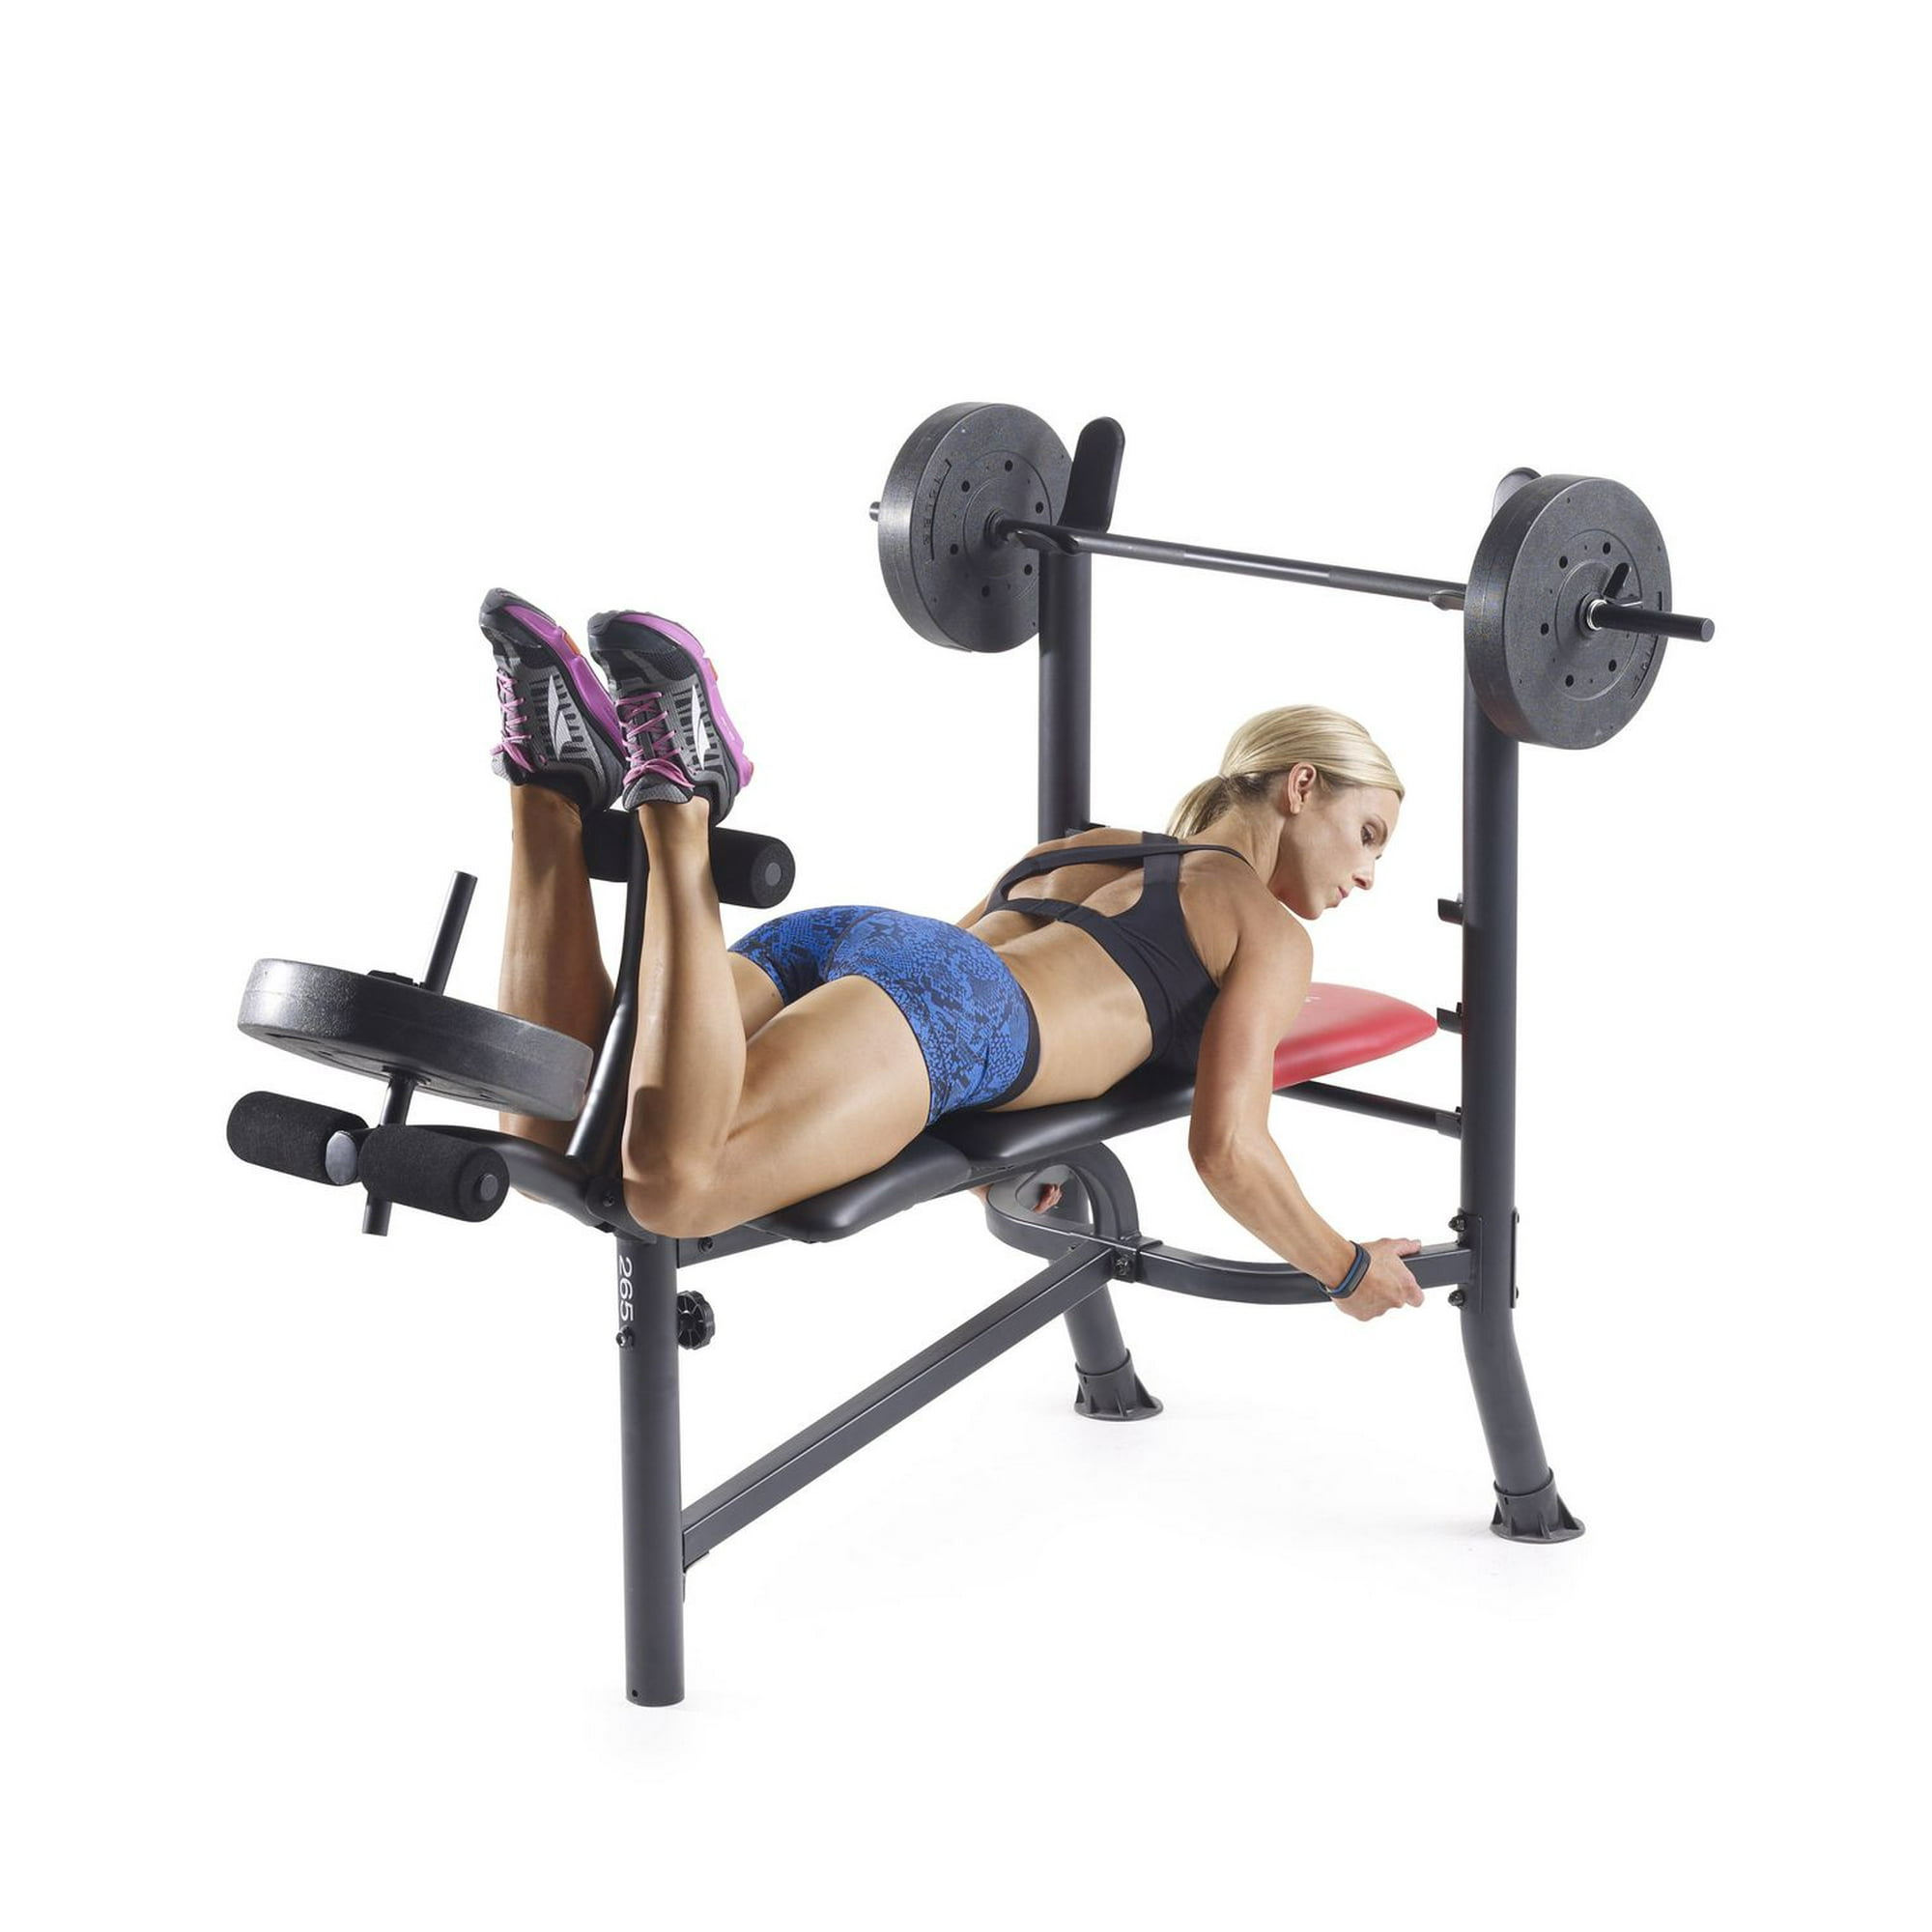 Hashtag Fitness 20 in1 gym bench(Flat & Incline) with lat pull down for  home workout - Black , Max weight : 250 Kg : : Sports, Fitness &  Outdoors